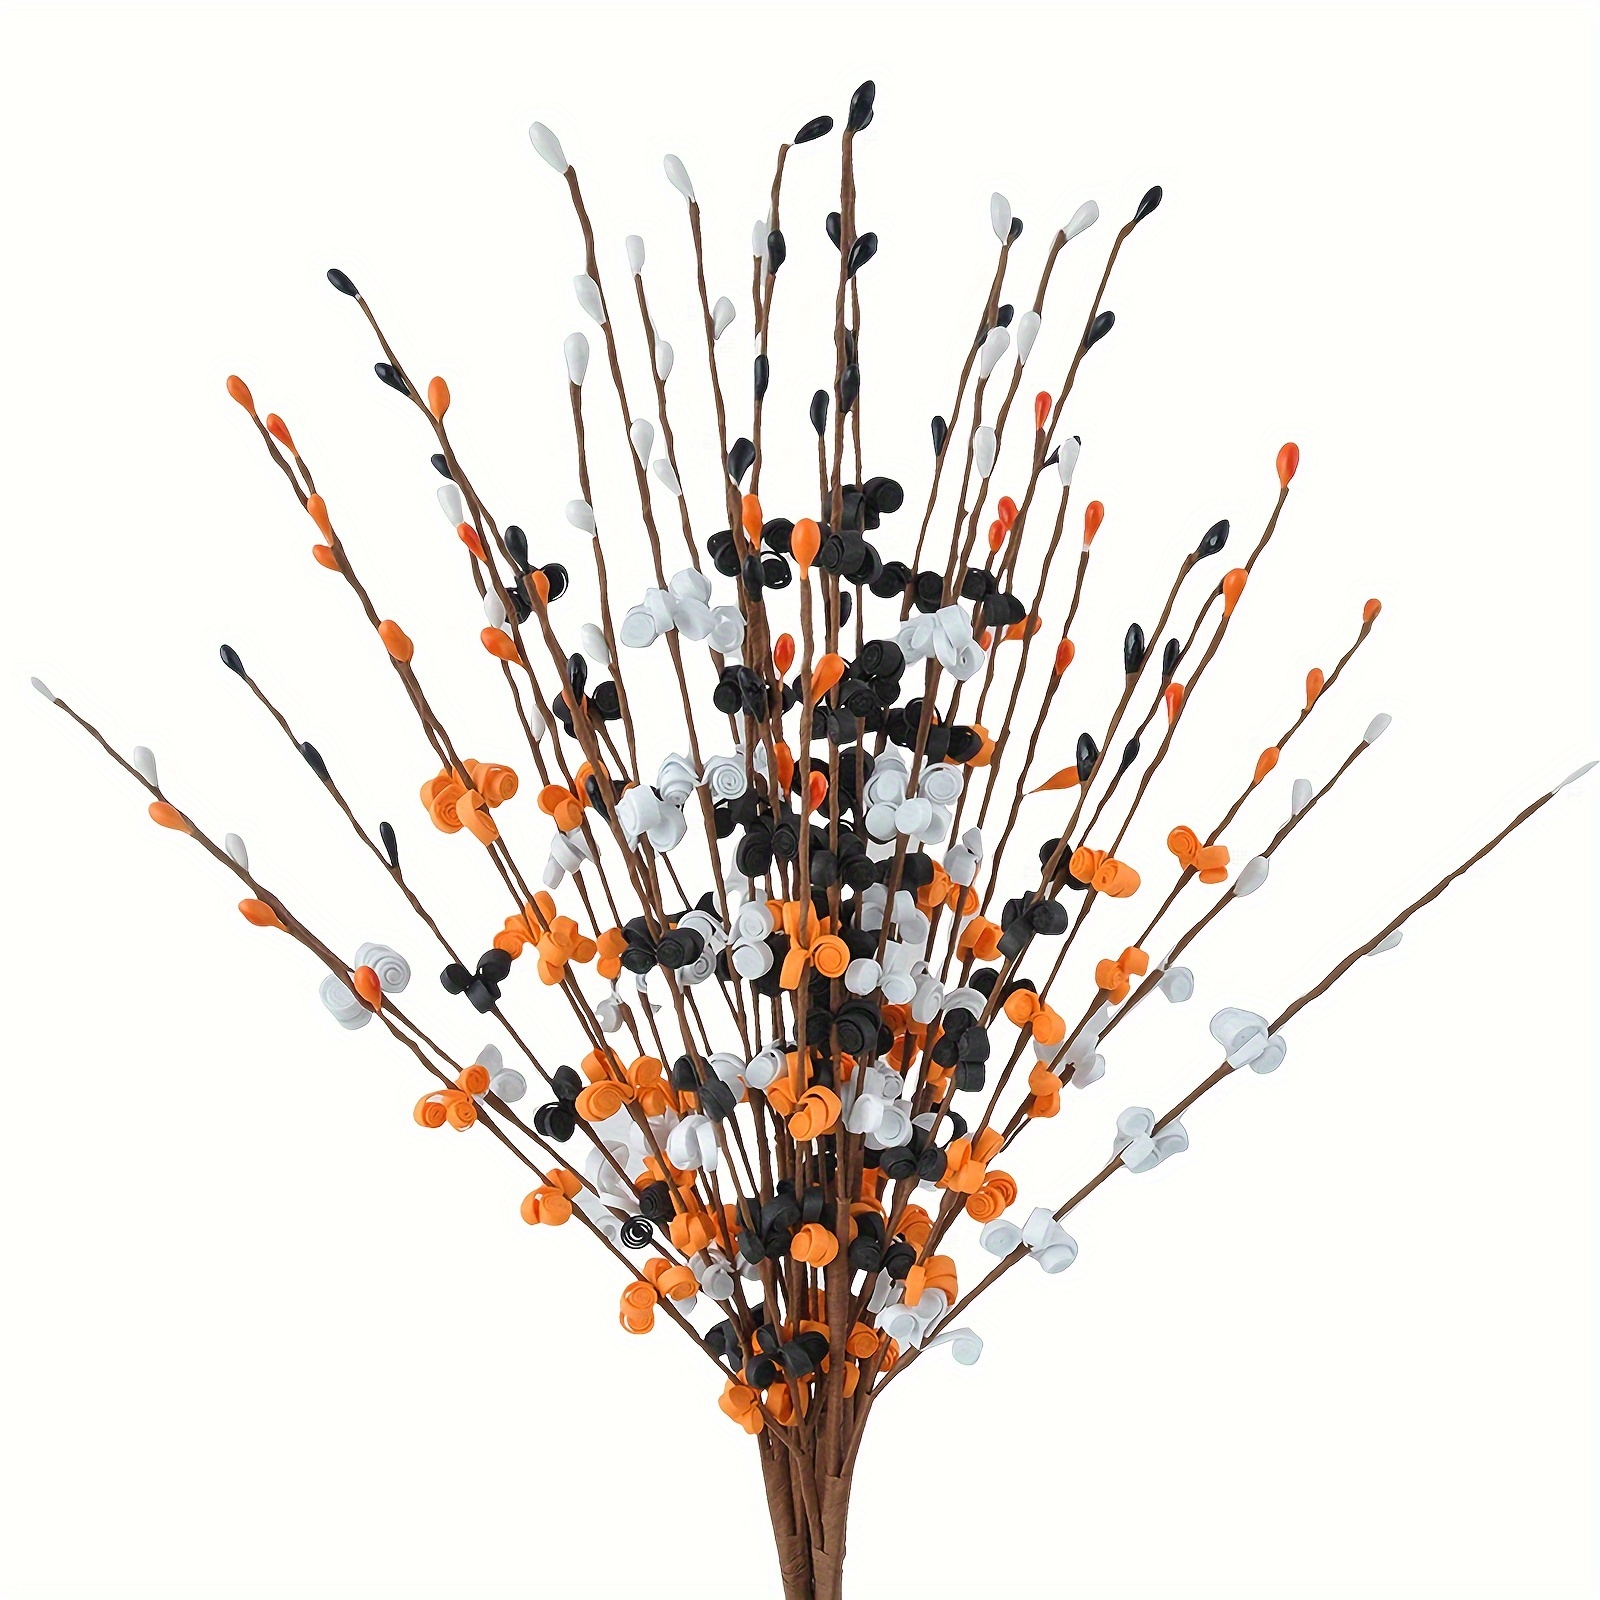 

6-pack 17.32" Artificial Jasmine Stems - Black, Orange & White For Decor | Perfect For Home Centerpieces